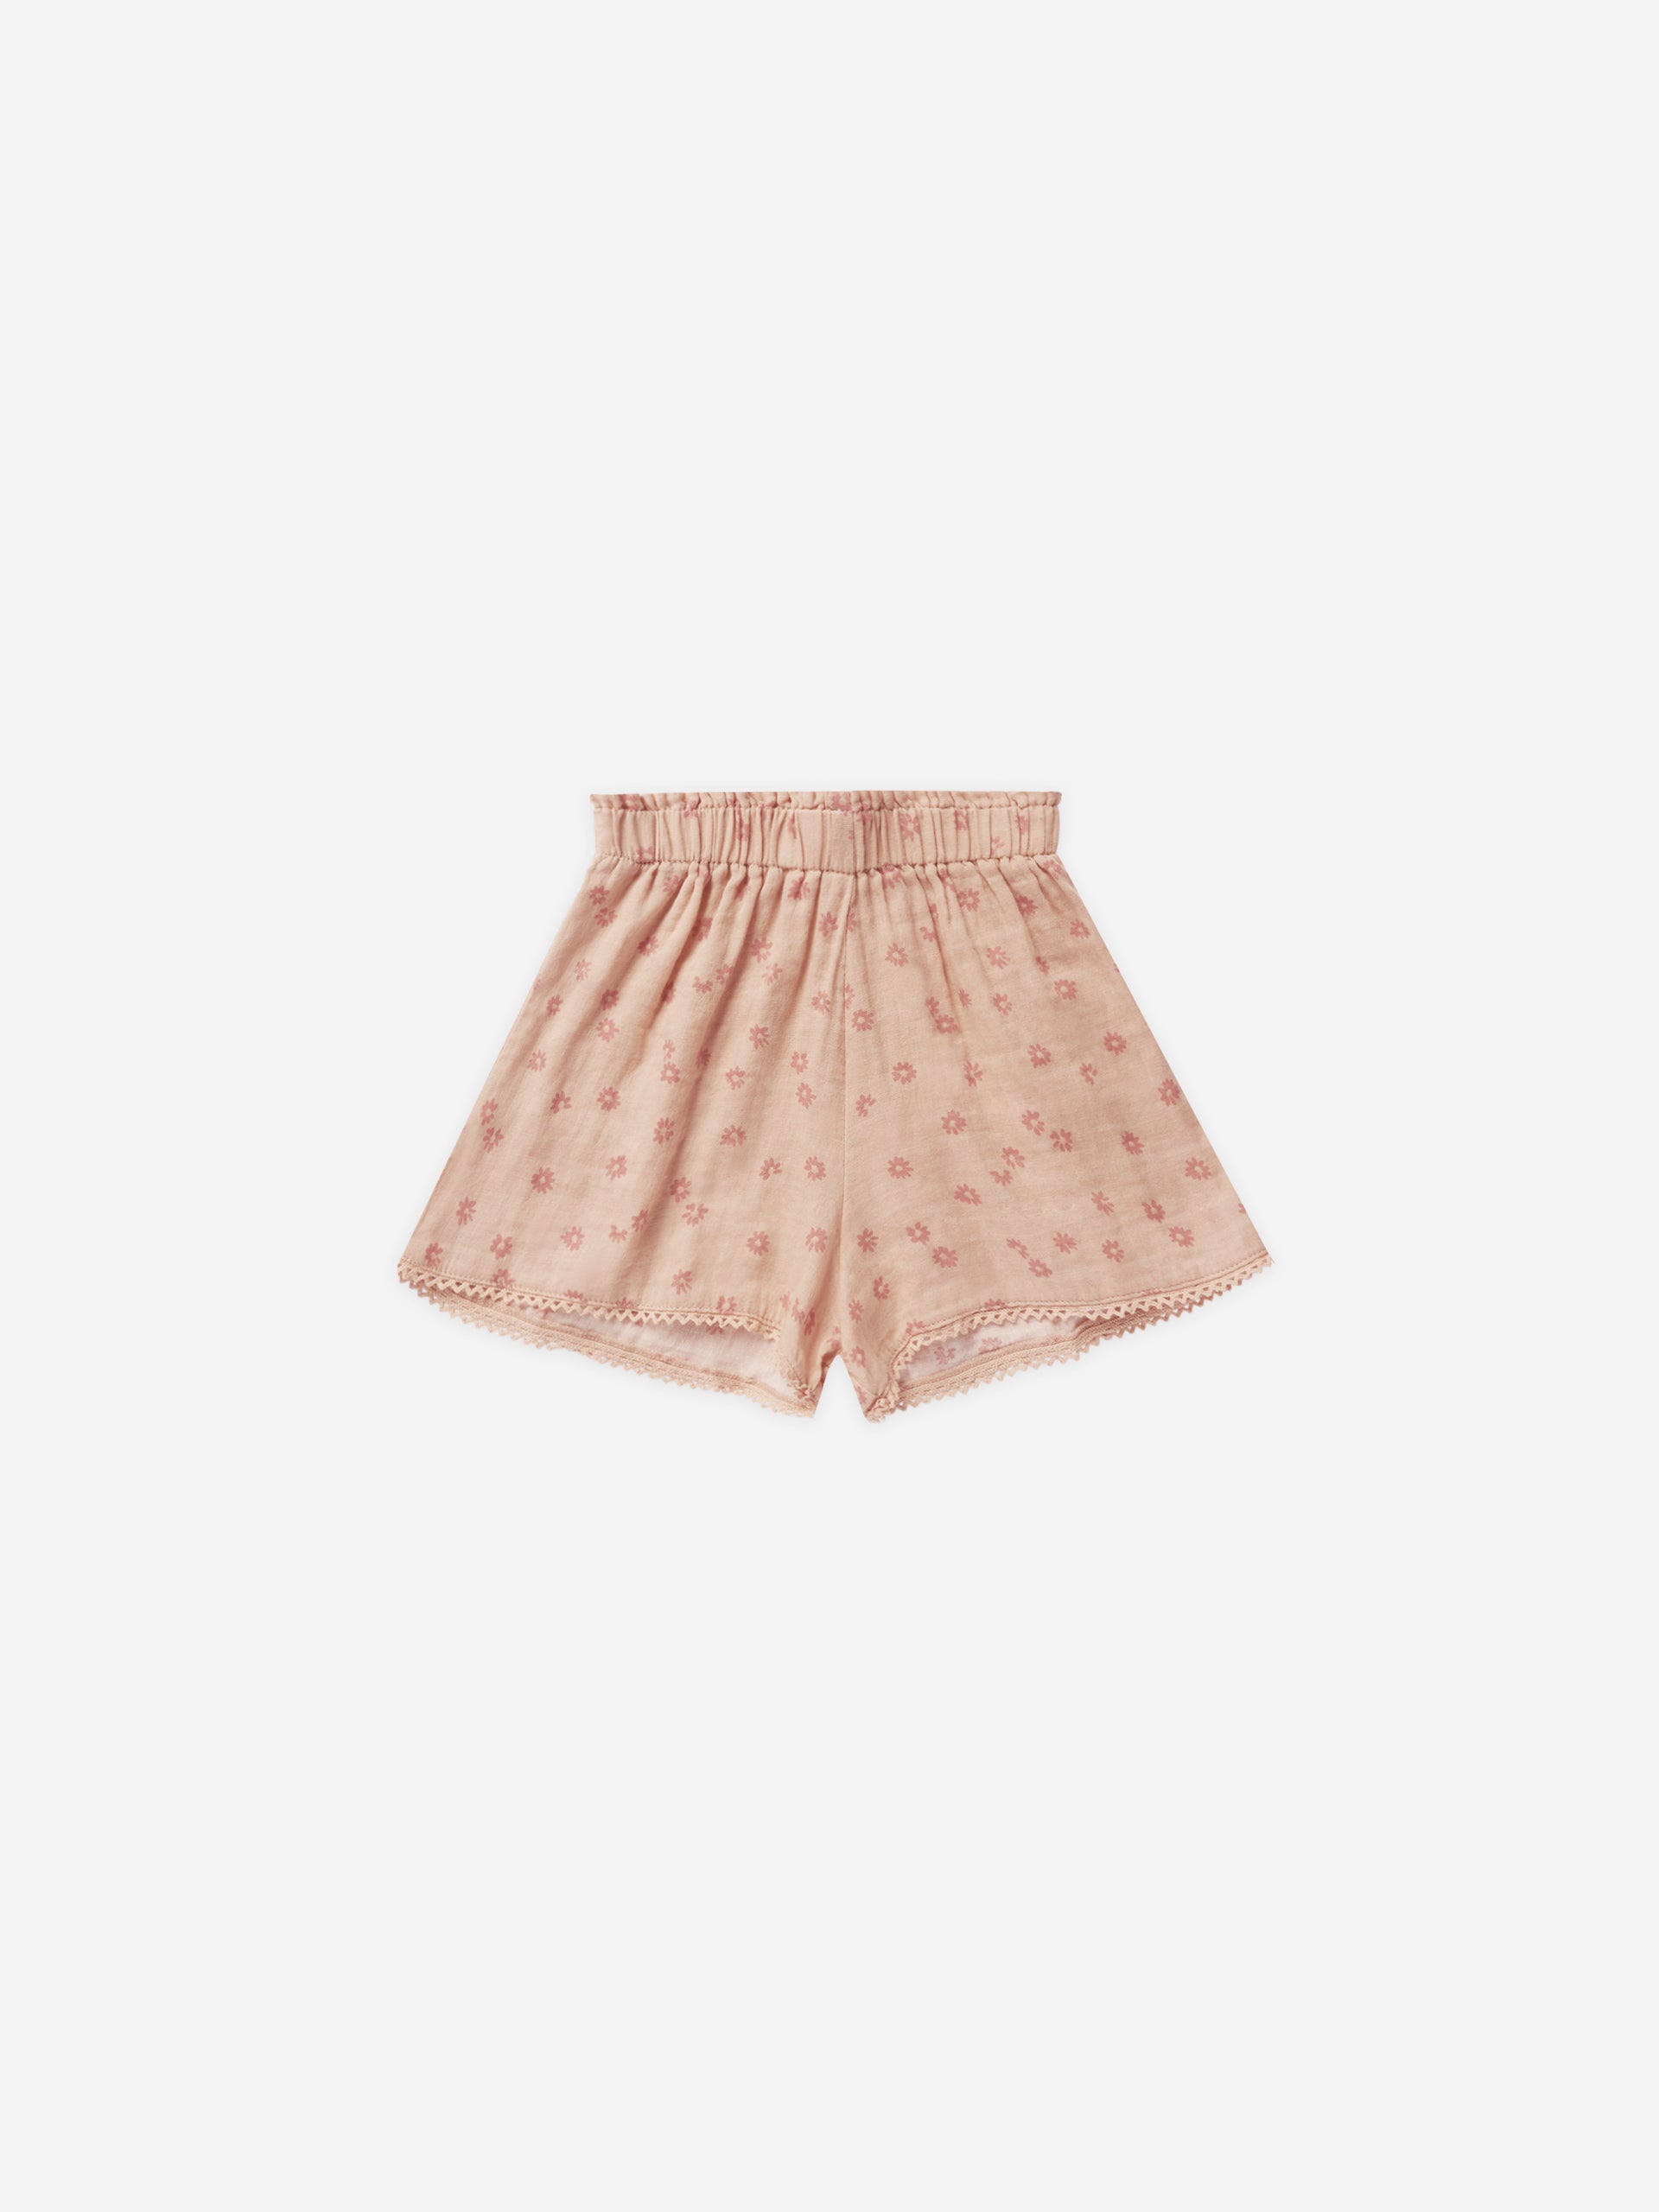 Remi Shorts || Pink Daisy - Rylee + Cru | Kids Clothes | Trendy Baby Clothes | Modern Infant Outfits |